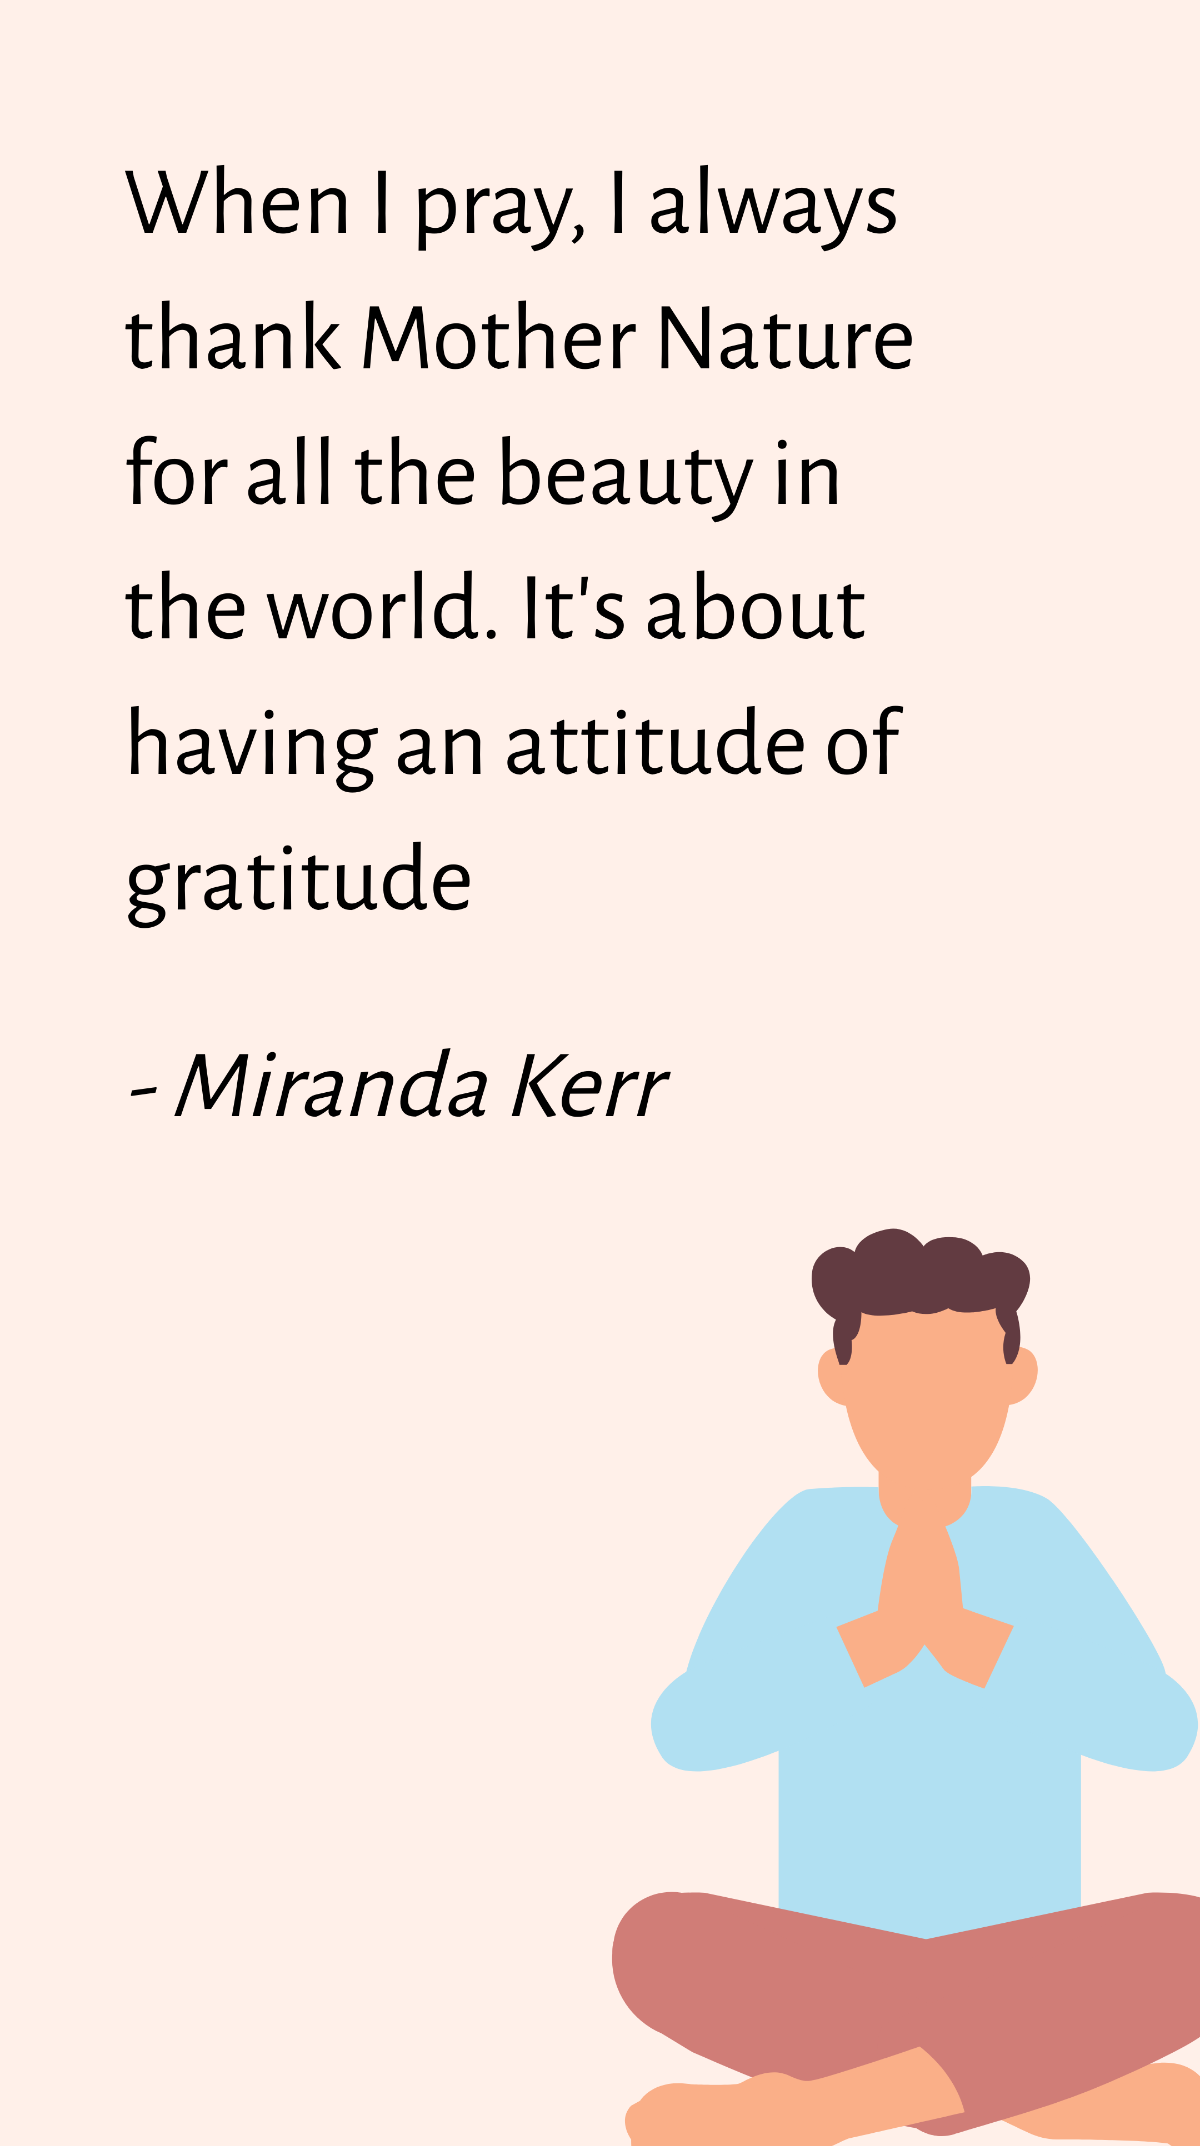 Miranda Kerr - When I pray, I always thank Mother Nature for all the beauty in the world. It's about having an attitude of gratitude Template